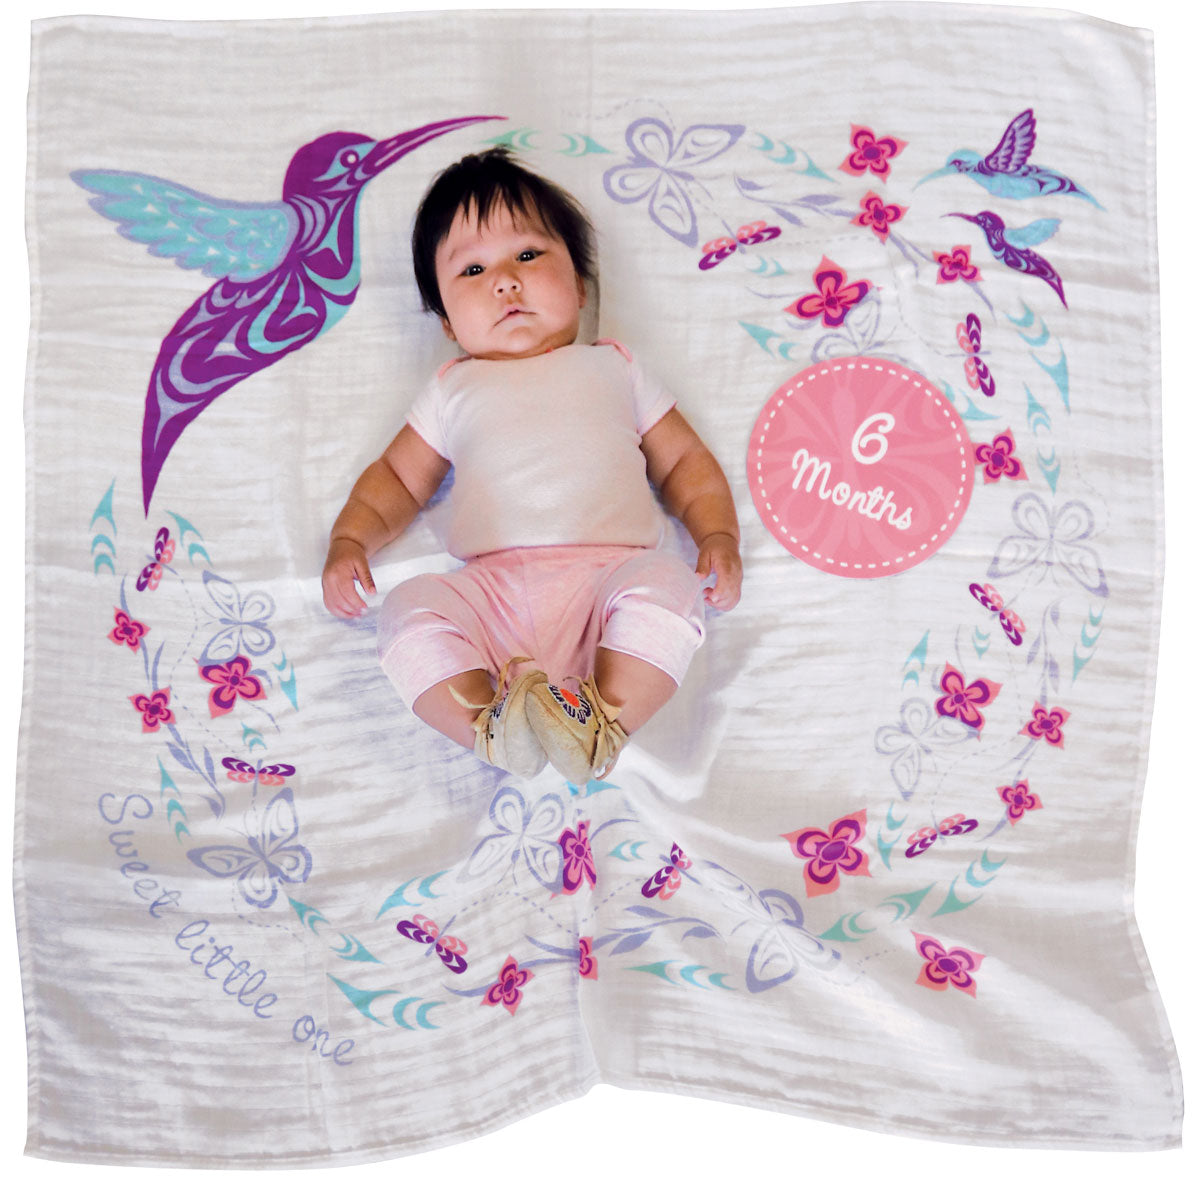 BABY BLANKETS - Hummingbird - BBK13 - House of Himwitsa Native Art Gallery and Gifts